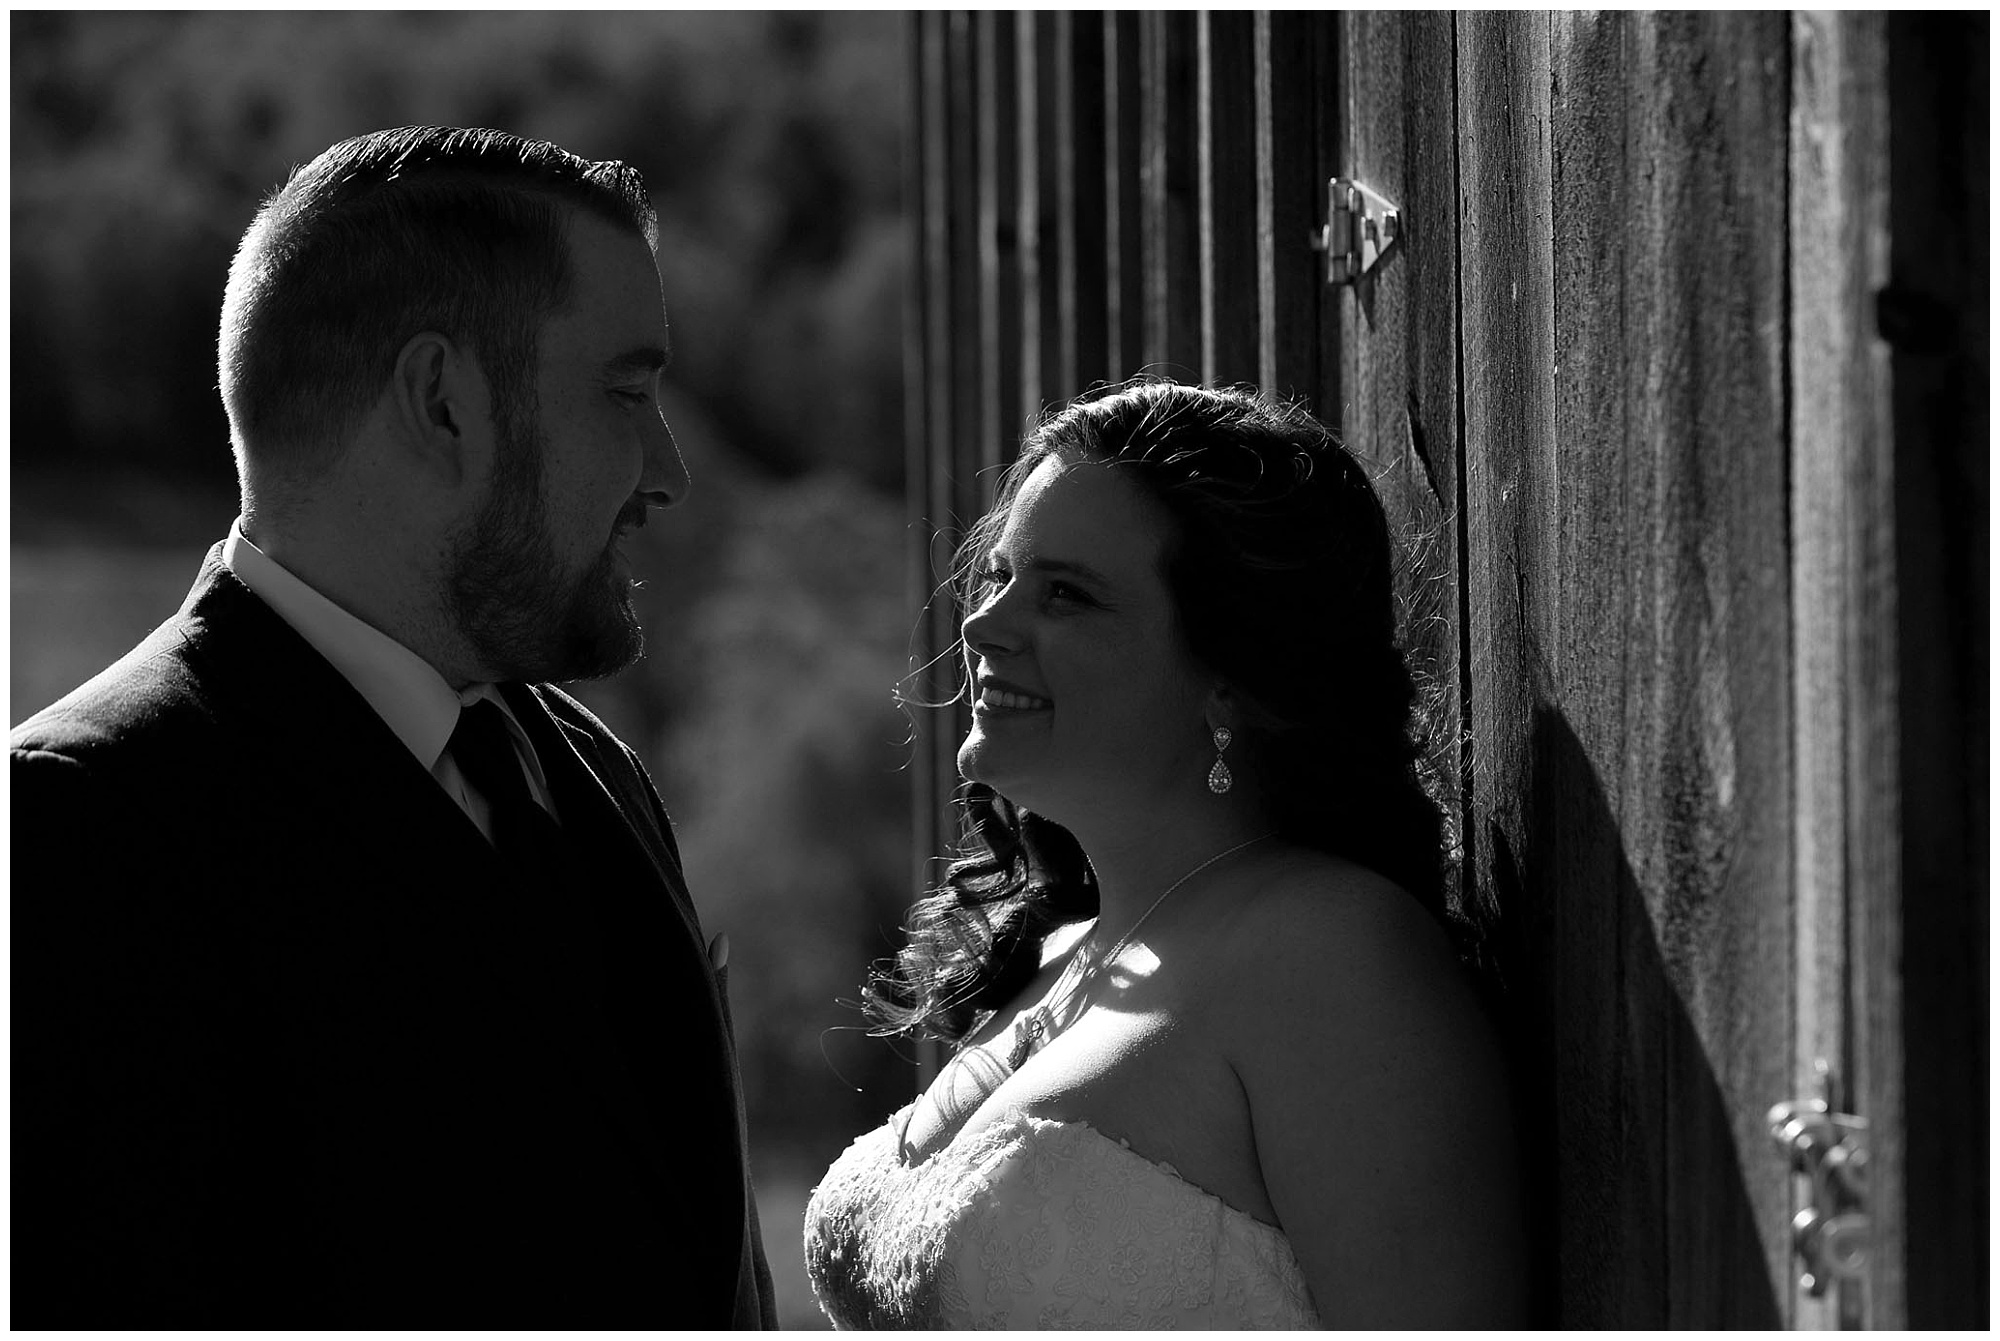 Photo of a bride and groom in black and white looking lovingly at each other.